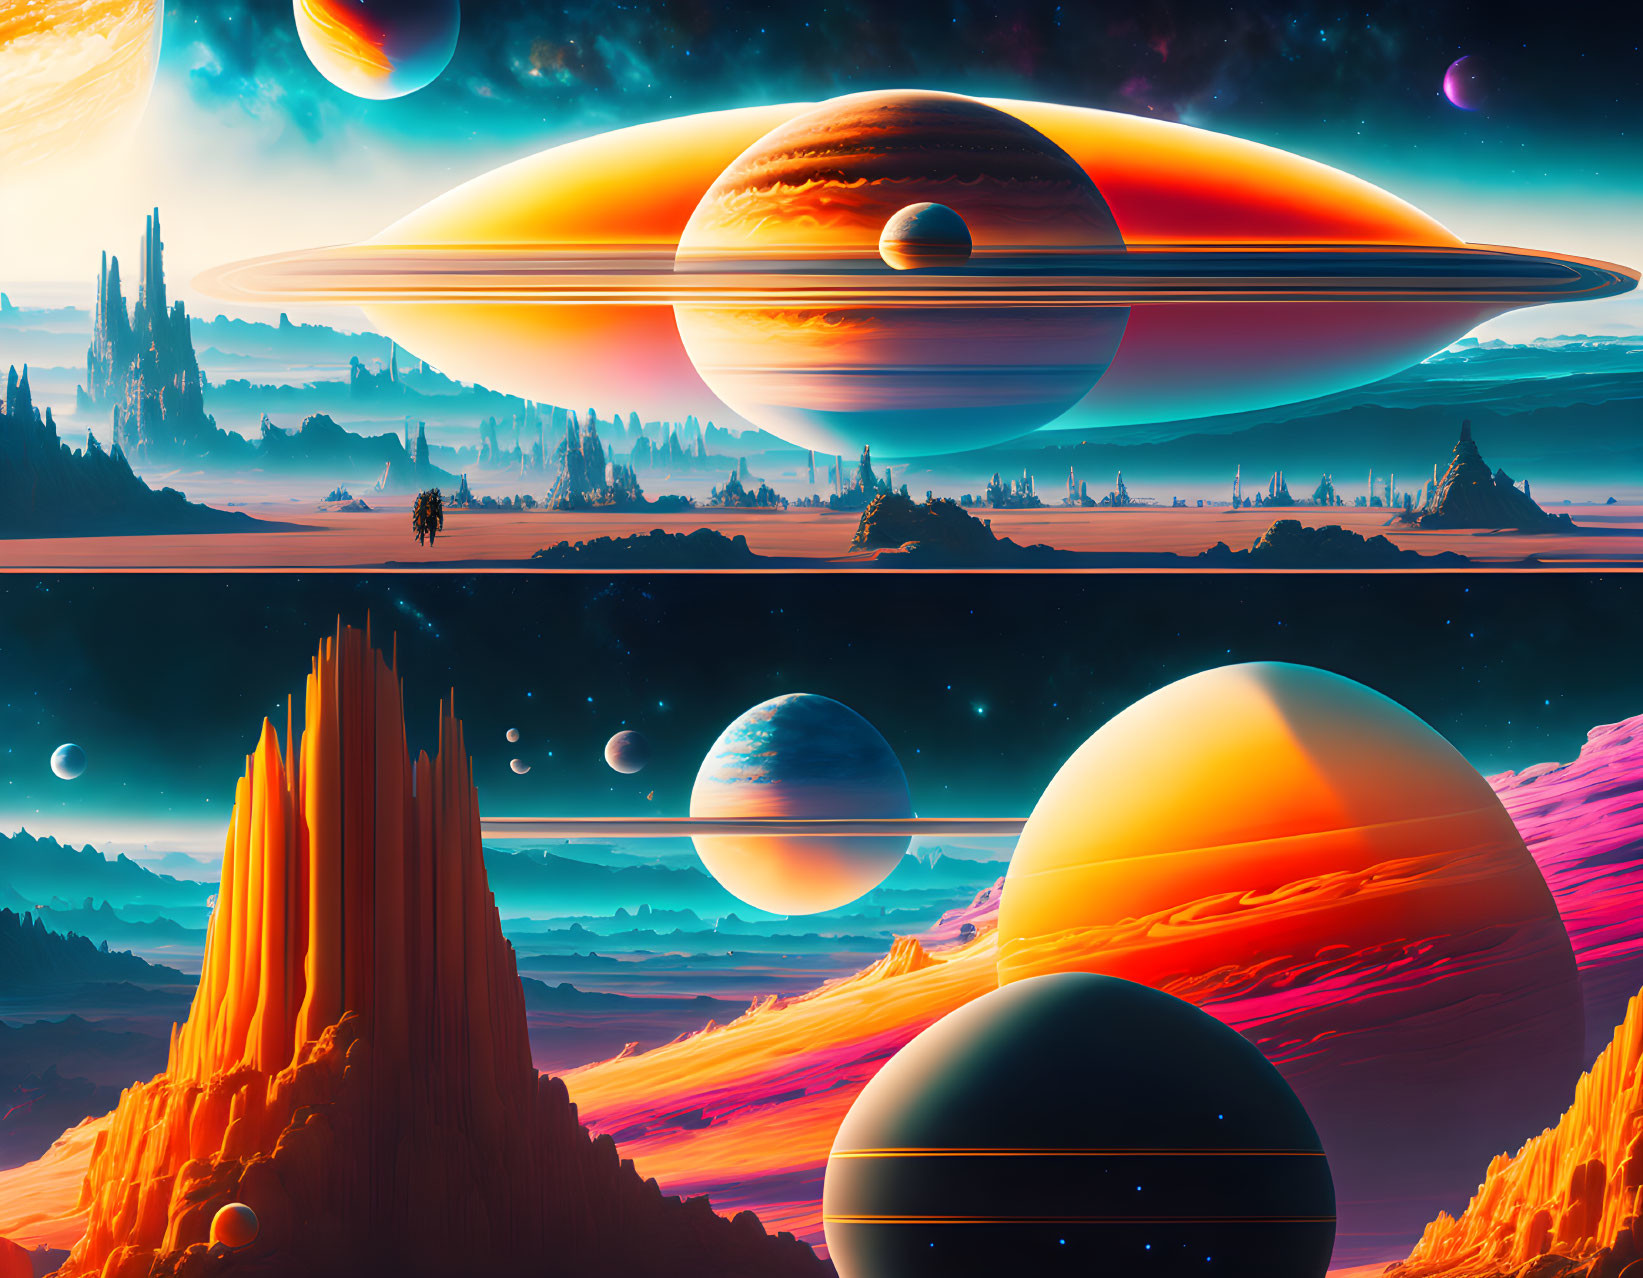 Vibrant sci-fi landscape with ringed planets, rocky formations, and observer.